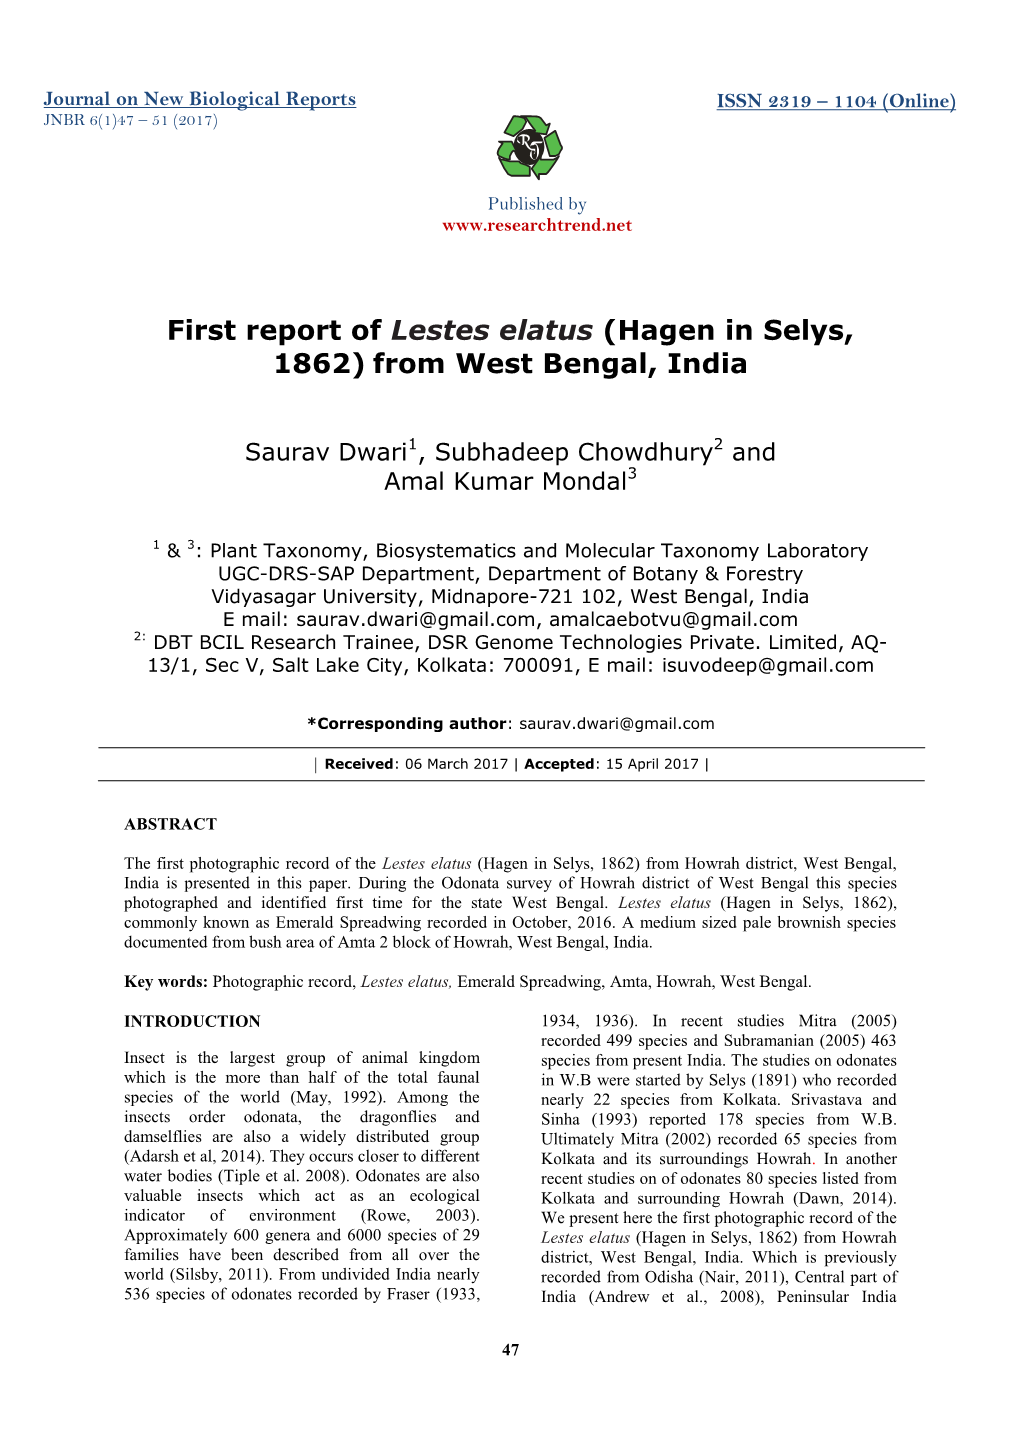 First Report of Lestes Elatus (Hagen in Selys, 1862) from West Bengal, India